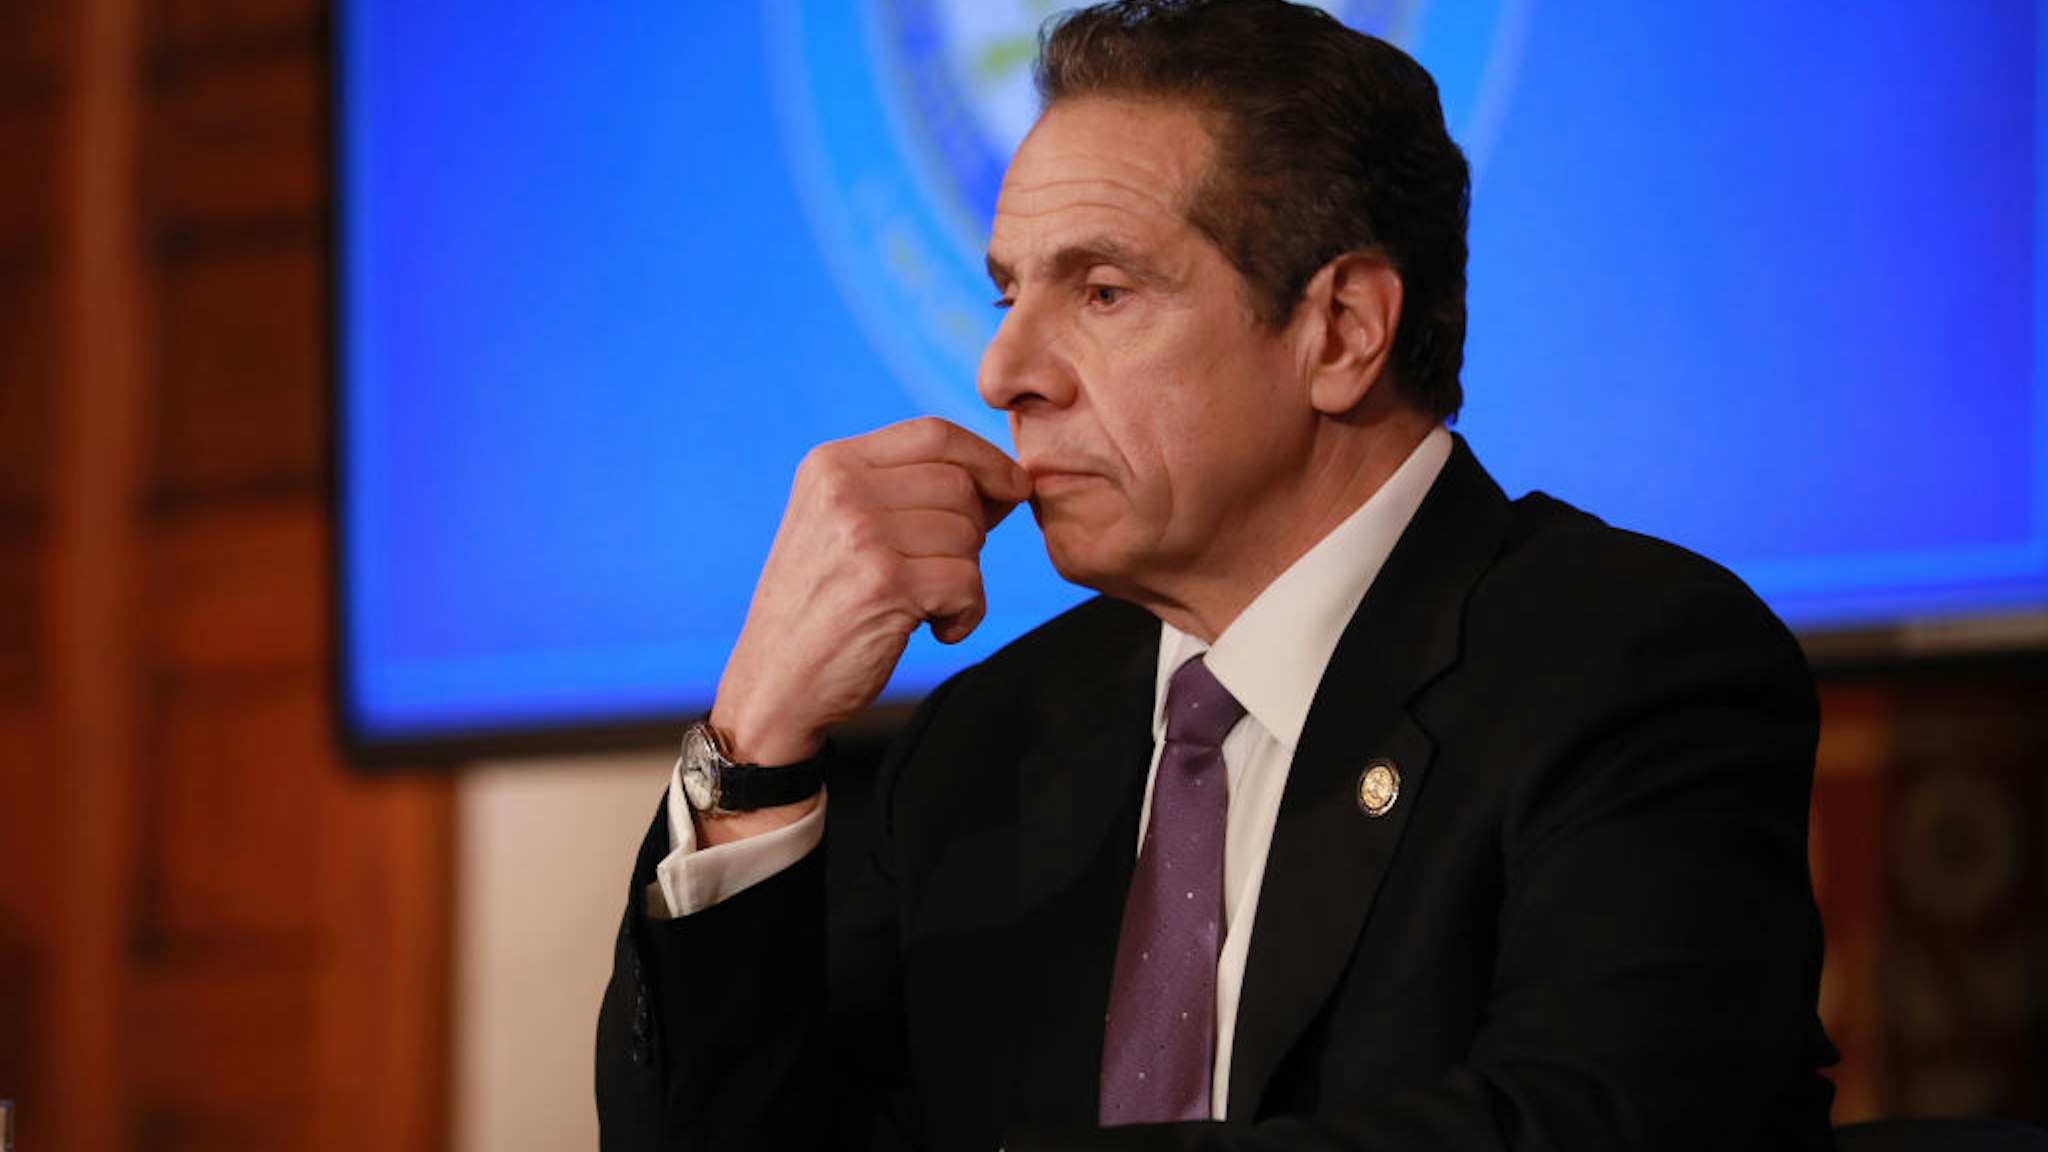 New York Governor Andrew Cuomo gives his a press briefing about the coronavirus crisis on April 17, 2020 in Albany, New York.